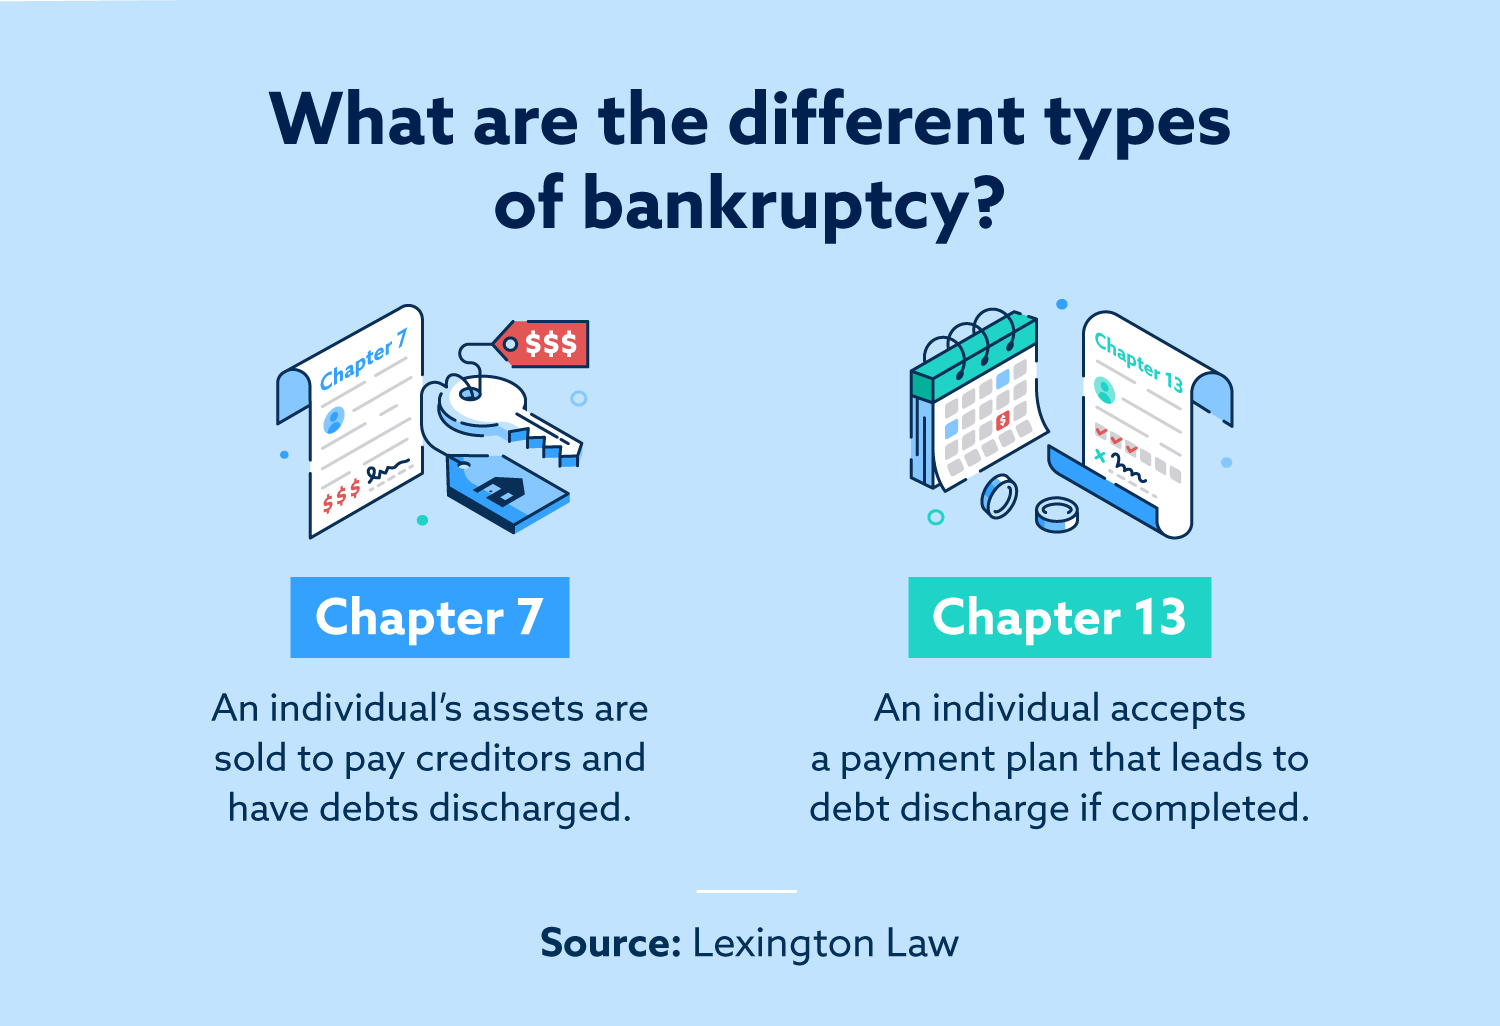 Different types of bankruptcy